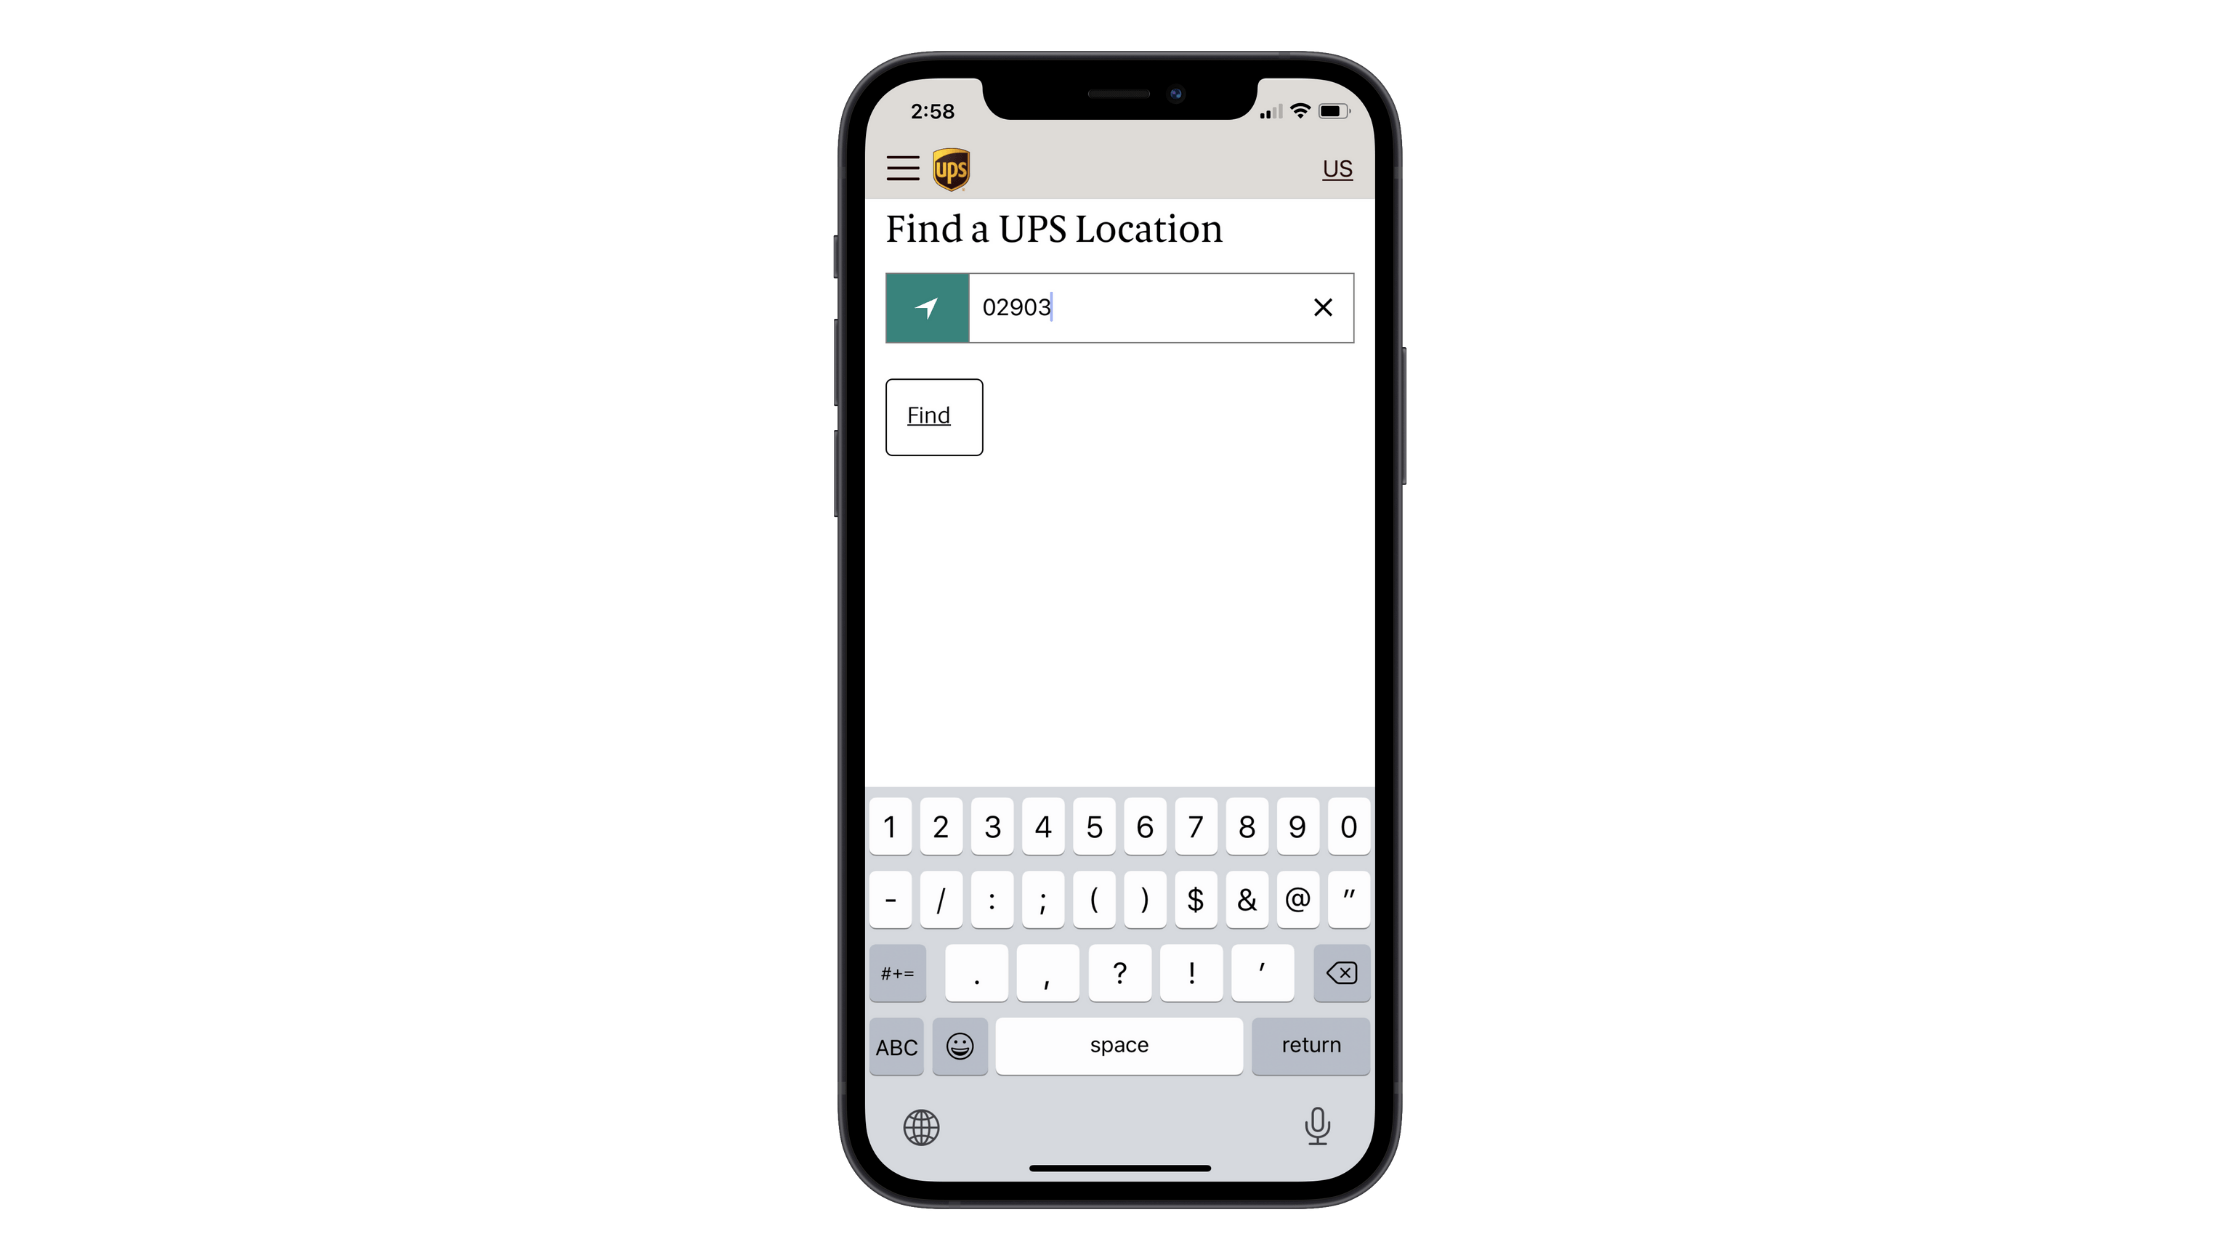 UPS mobile app users can “Find a UPS Location” by entering their zip code into the search box and clicking “Find”.